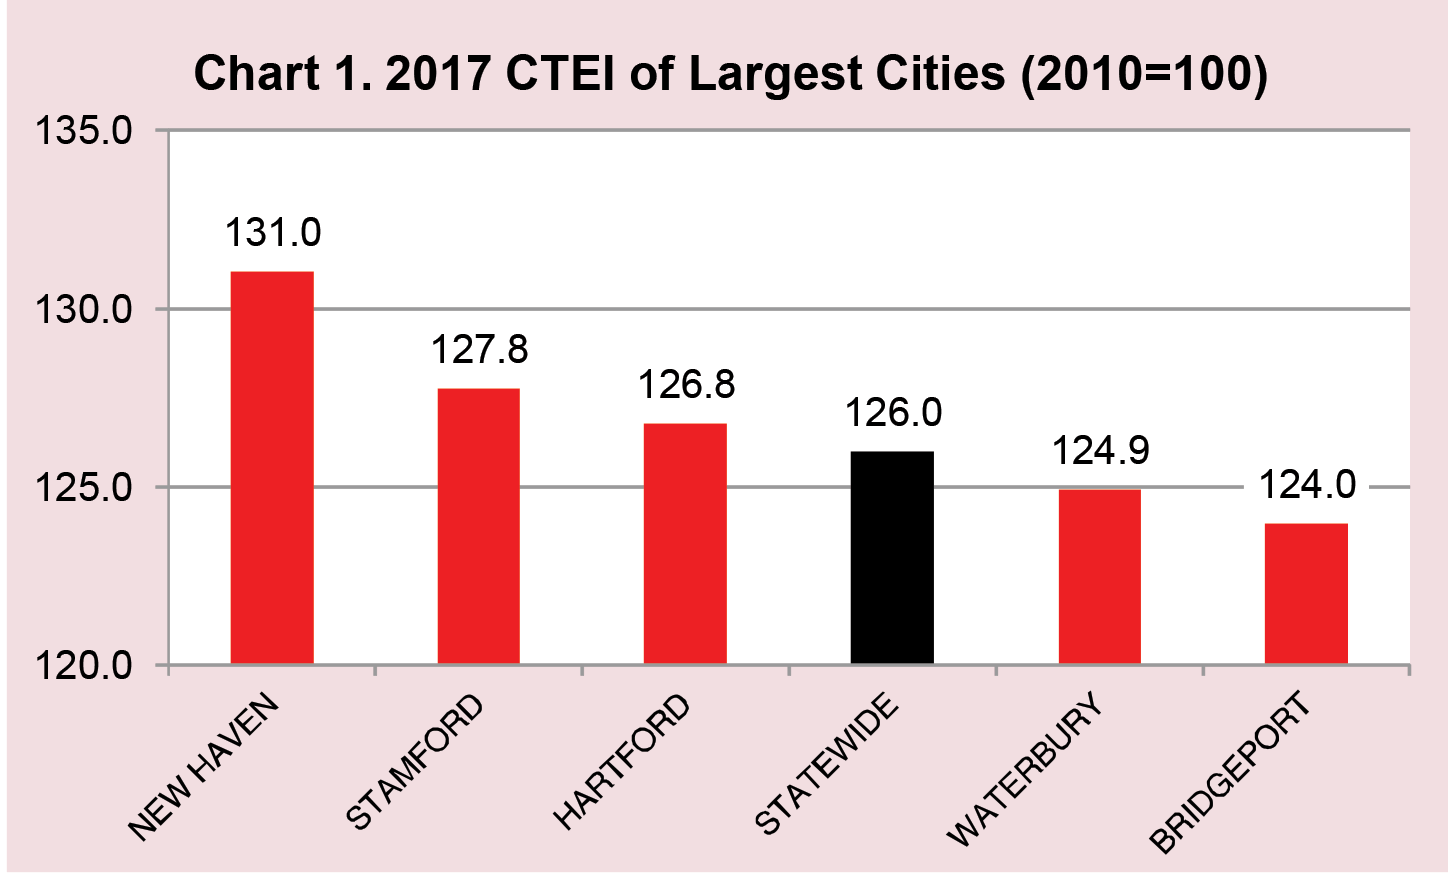 Chart 1. 2017 CTEI of Largest Cities (2010=100)